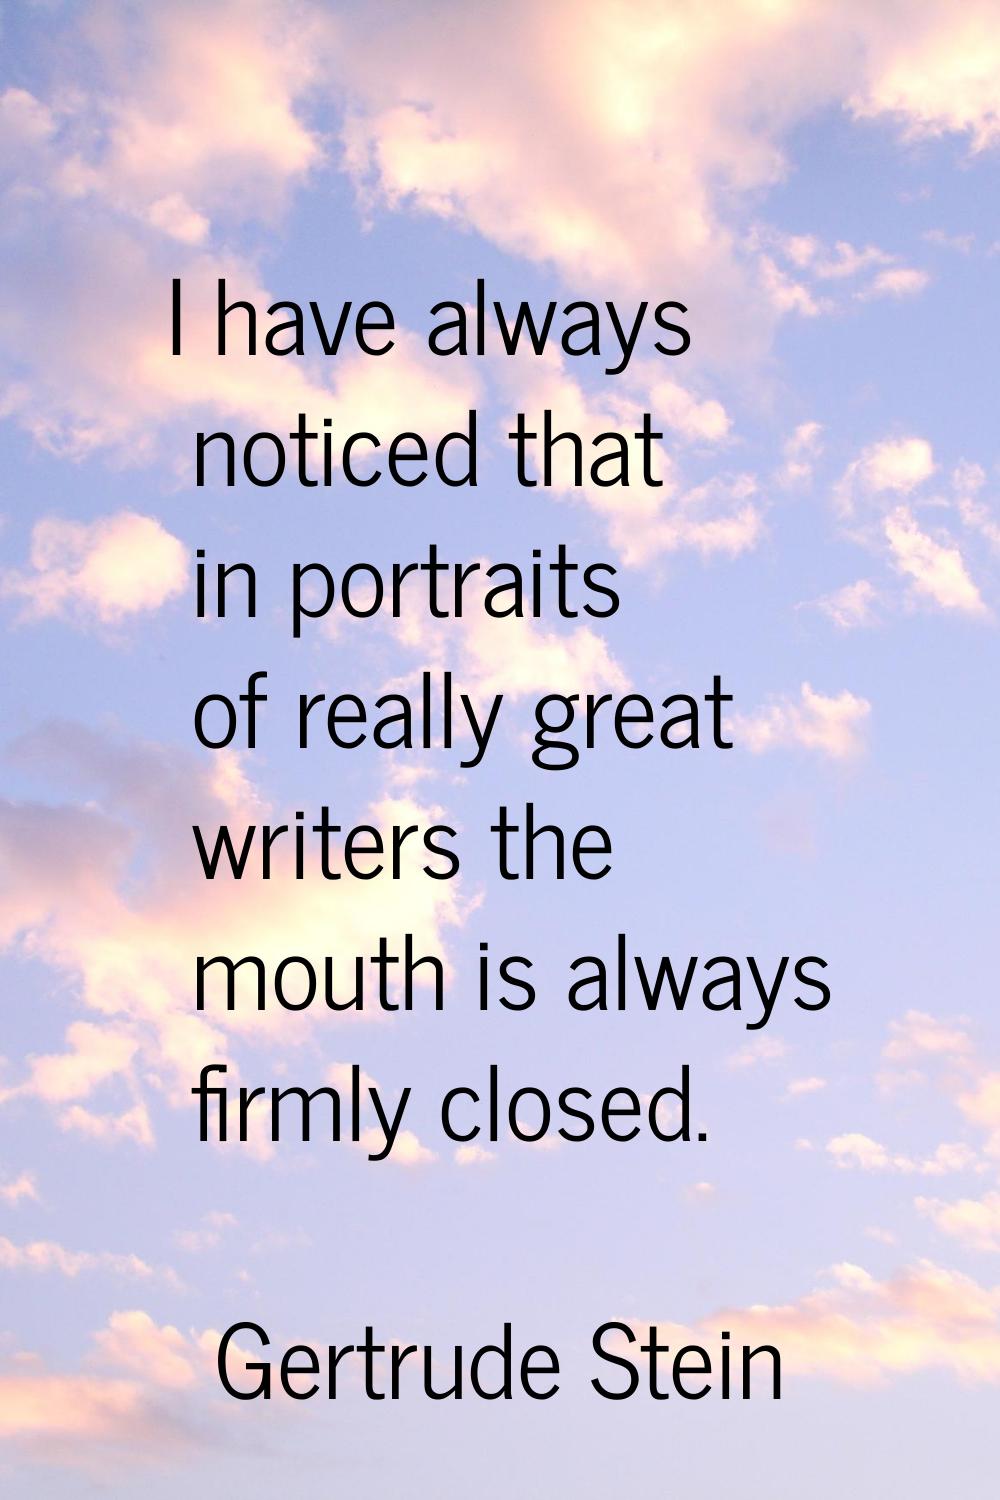 I have always noticed that in portraits of really great writers the mouth is always firmly closed.